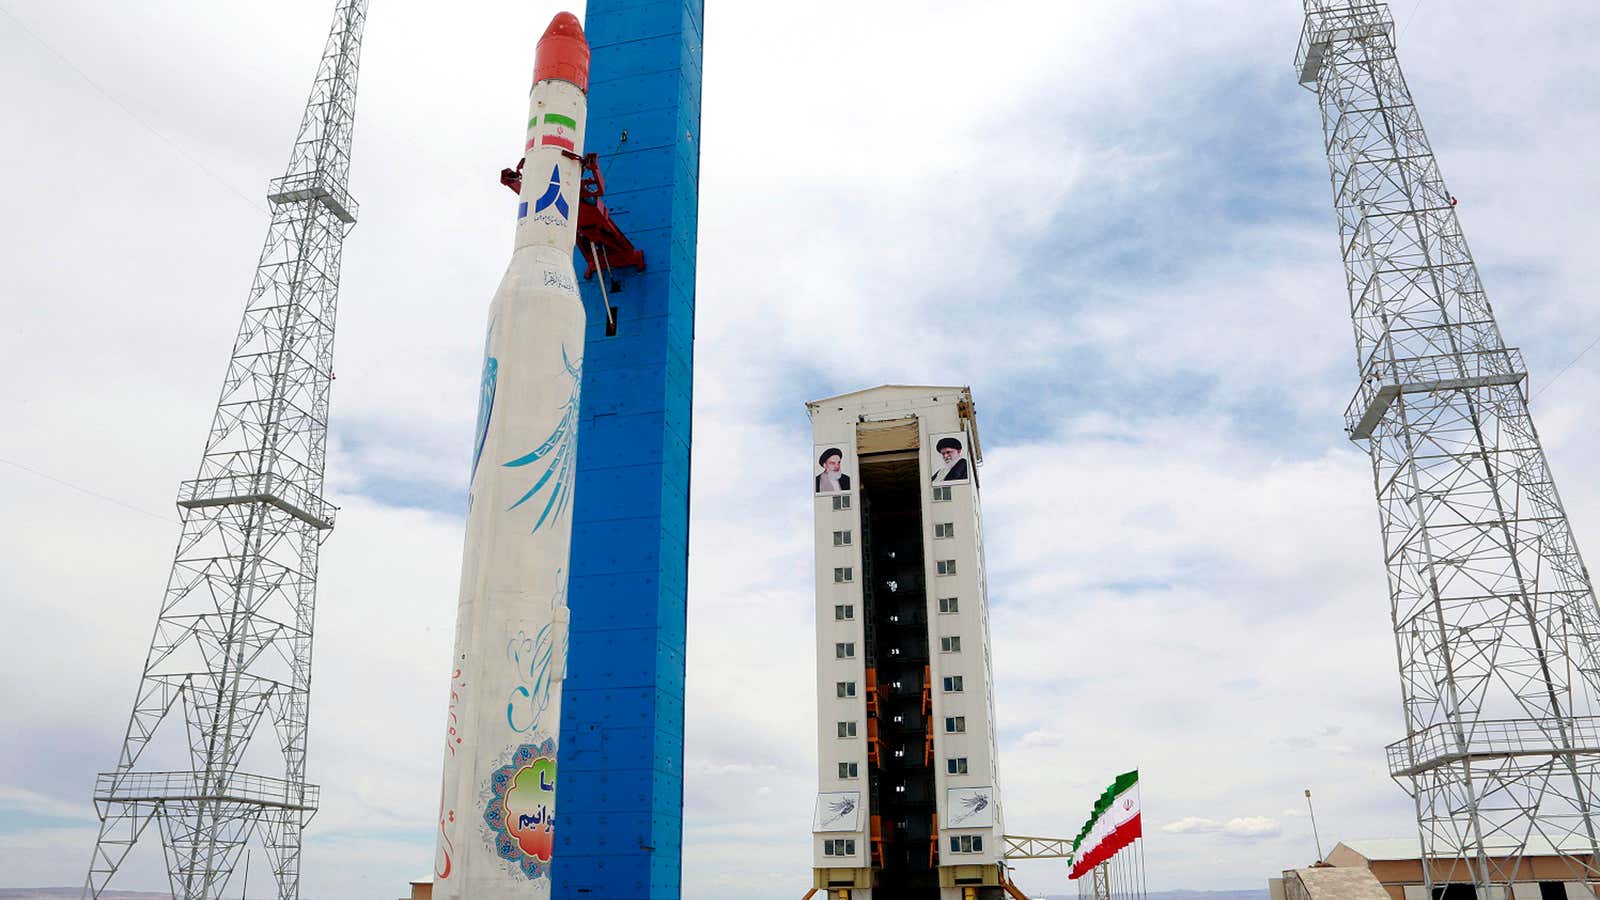 In 2017, Iran released this picture of the Simorgh rocket before a test launch.